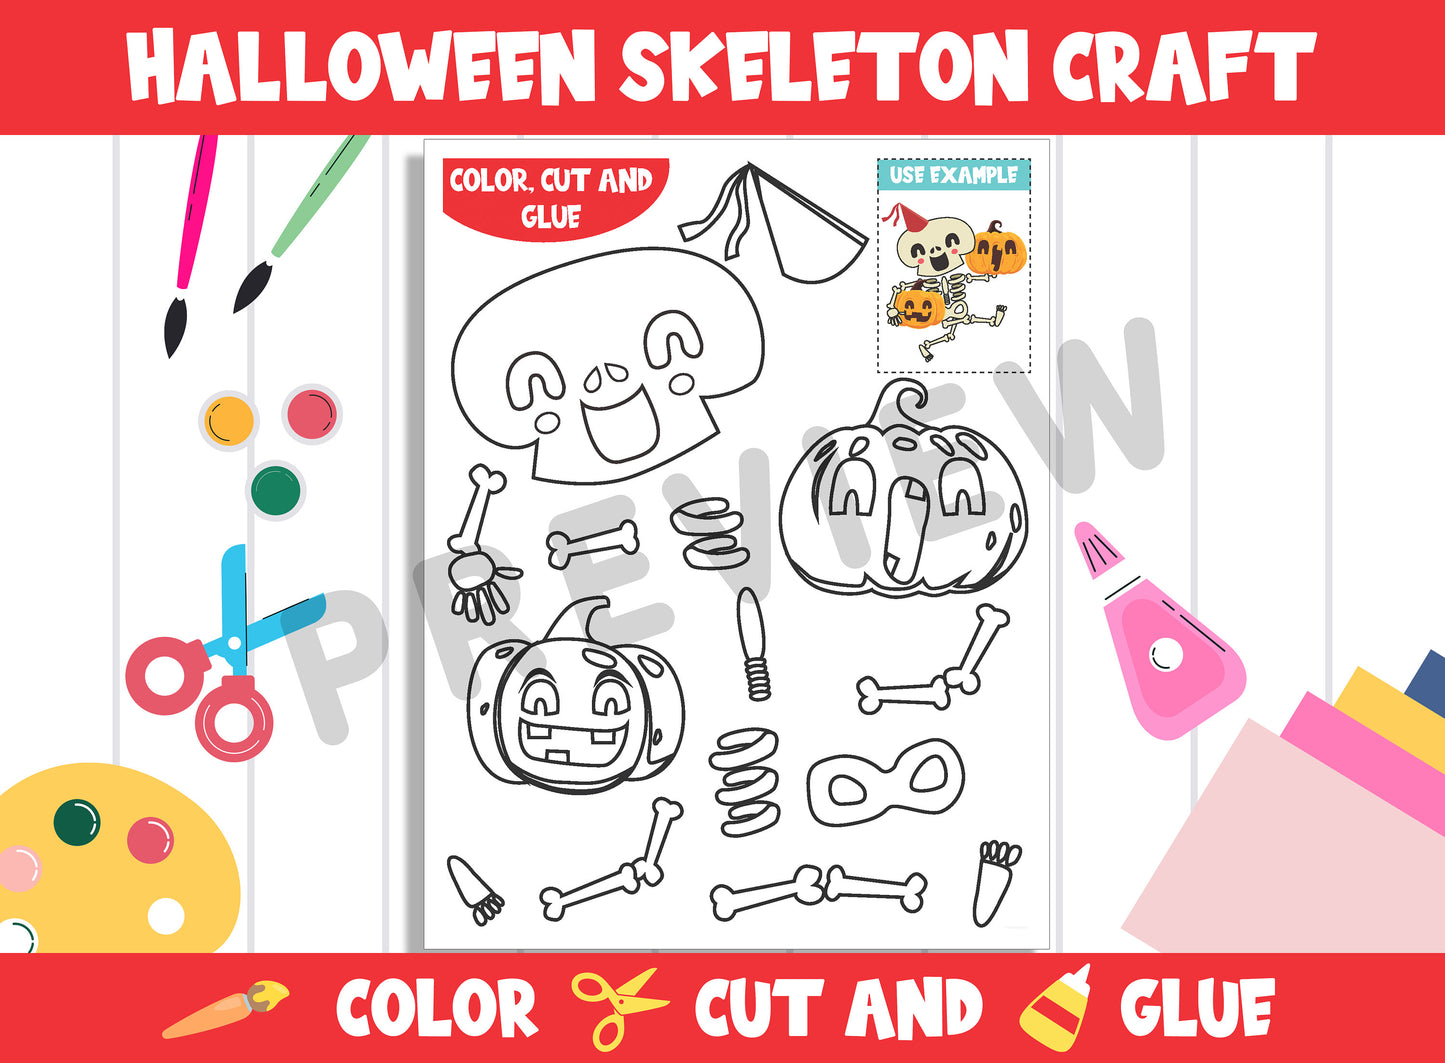 Halloween Skeleton Craft Activity - Color, Cut, and Glue for PreK to 2nd Grade, PDF File, Instant Download